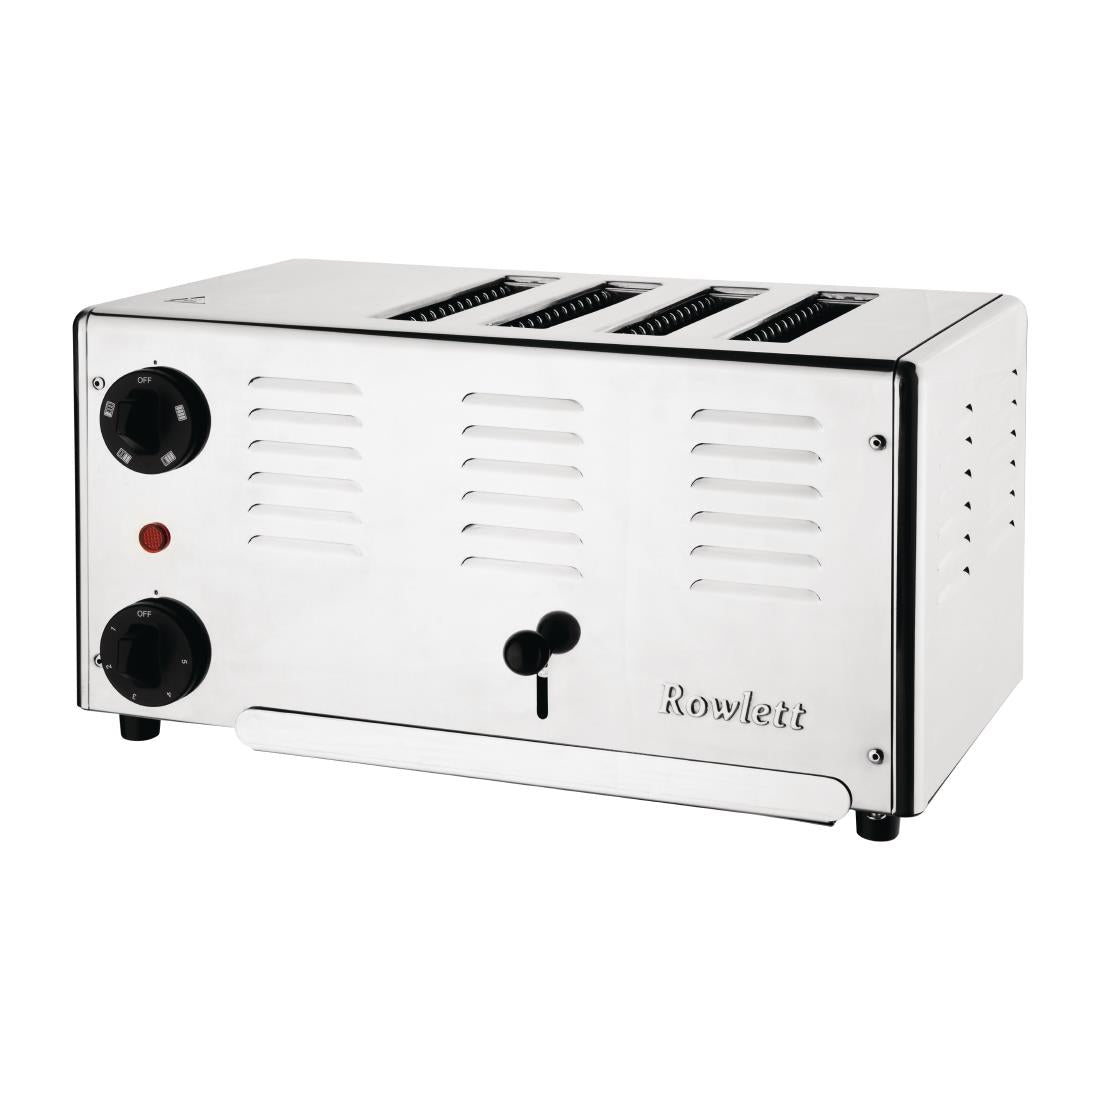 CH170 Rowlett Premier 4 Slot Toaster with 2 x Additional Elements JD Catering Equipment Solutions Ltd